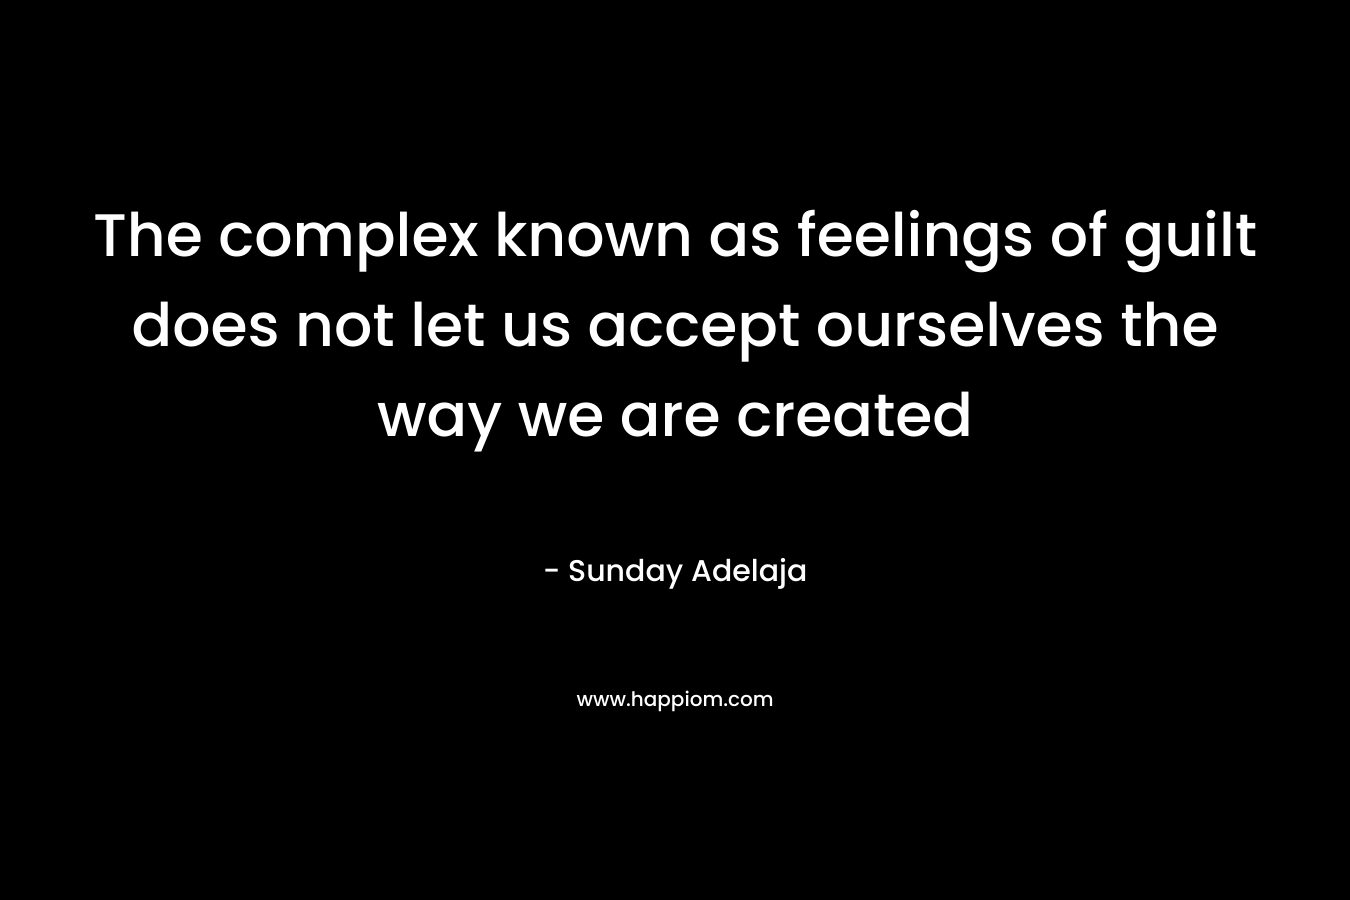 The complex known as feelings of guilt does not let us accept ourselves the way we are created